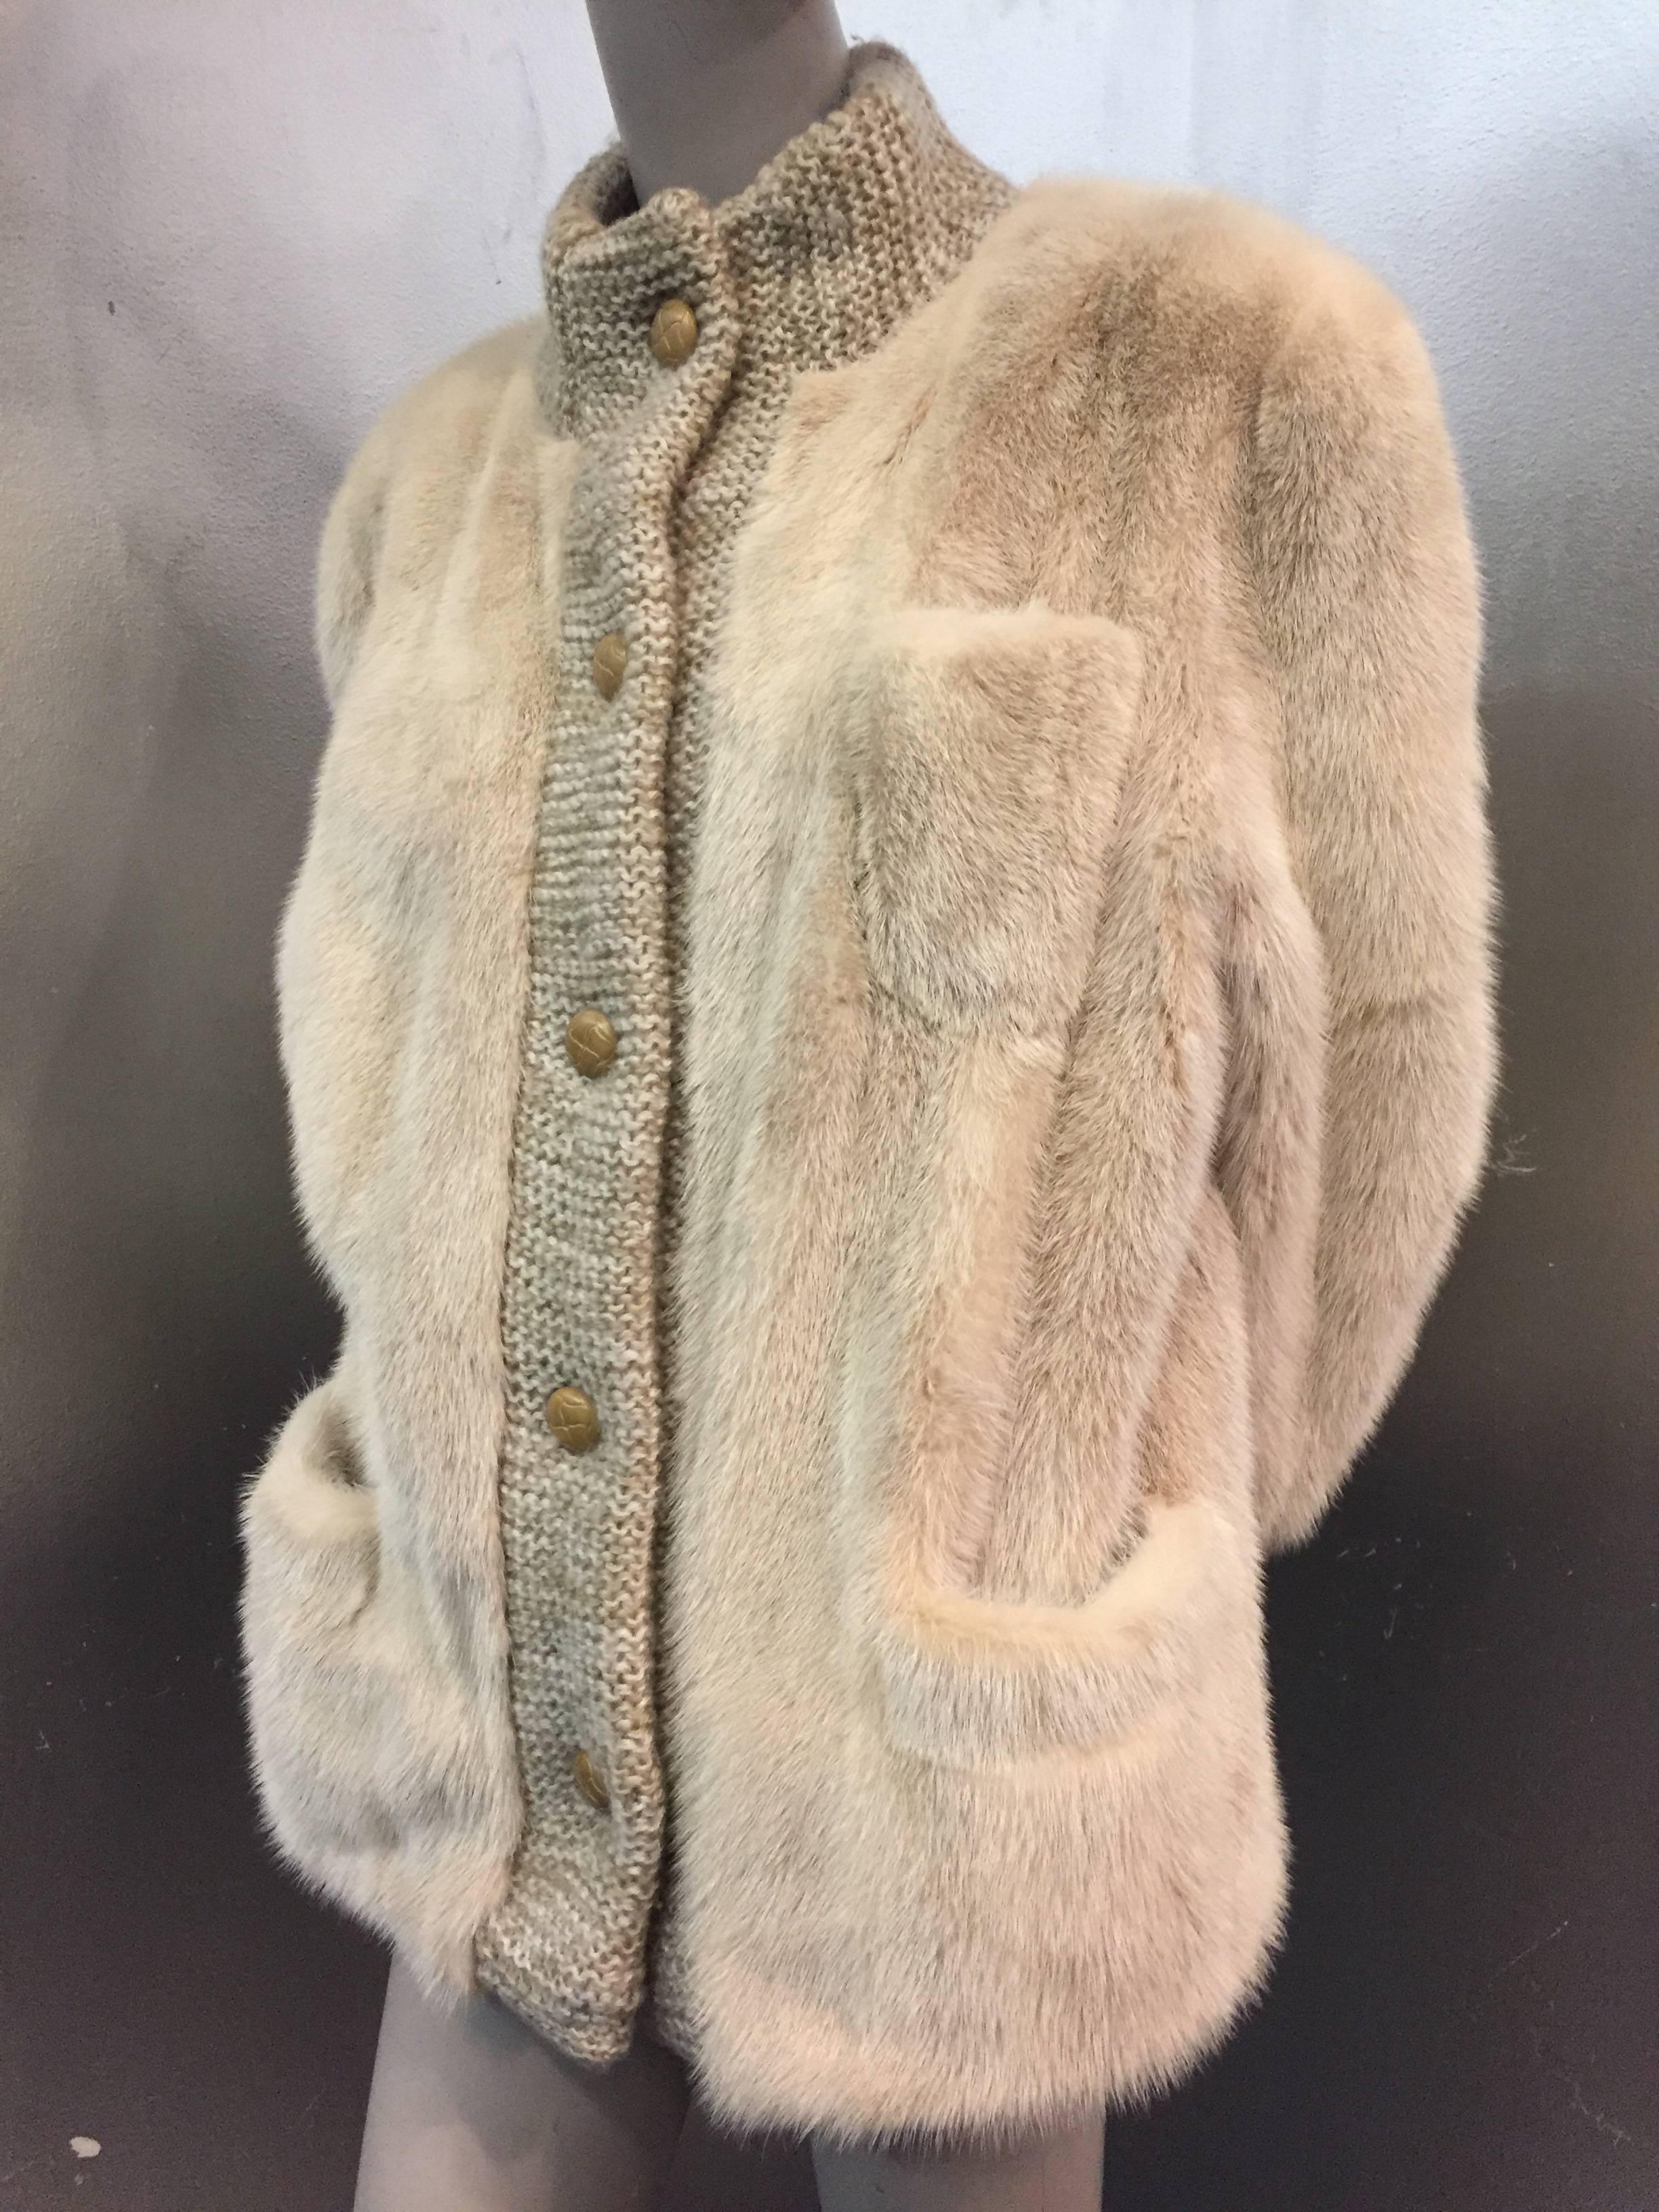 1980s Oscar de la Renta natural blonde mink cardigan jacket with chunky wool knit placket and cuffs.  Silk satin lined. Patch pockets at front and small breast pocket., 